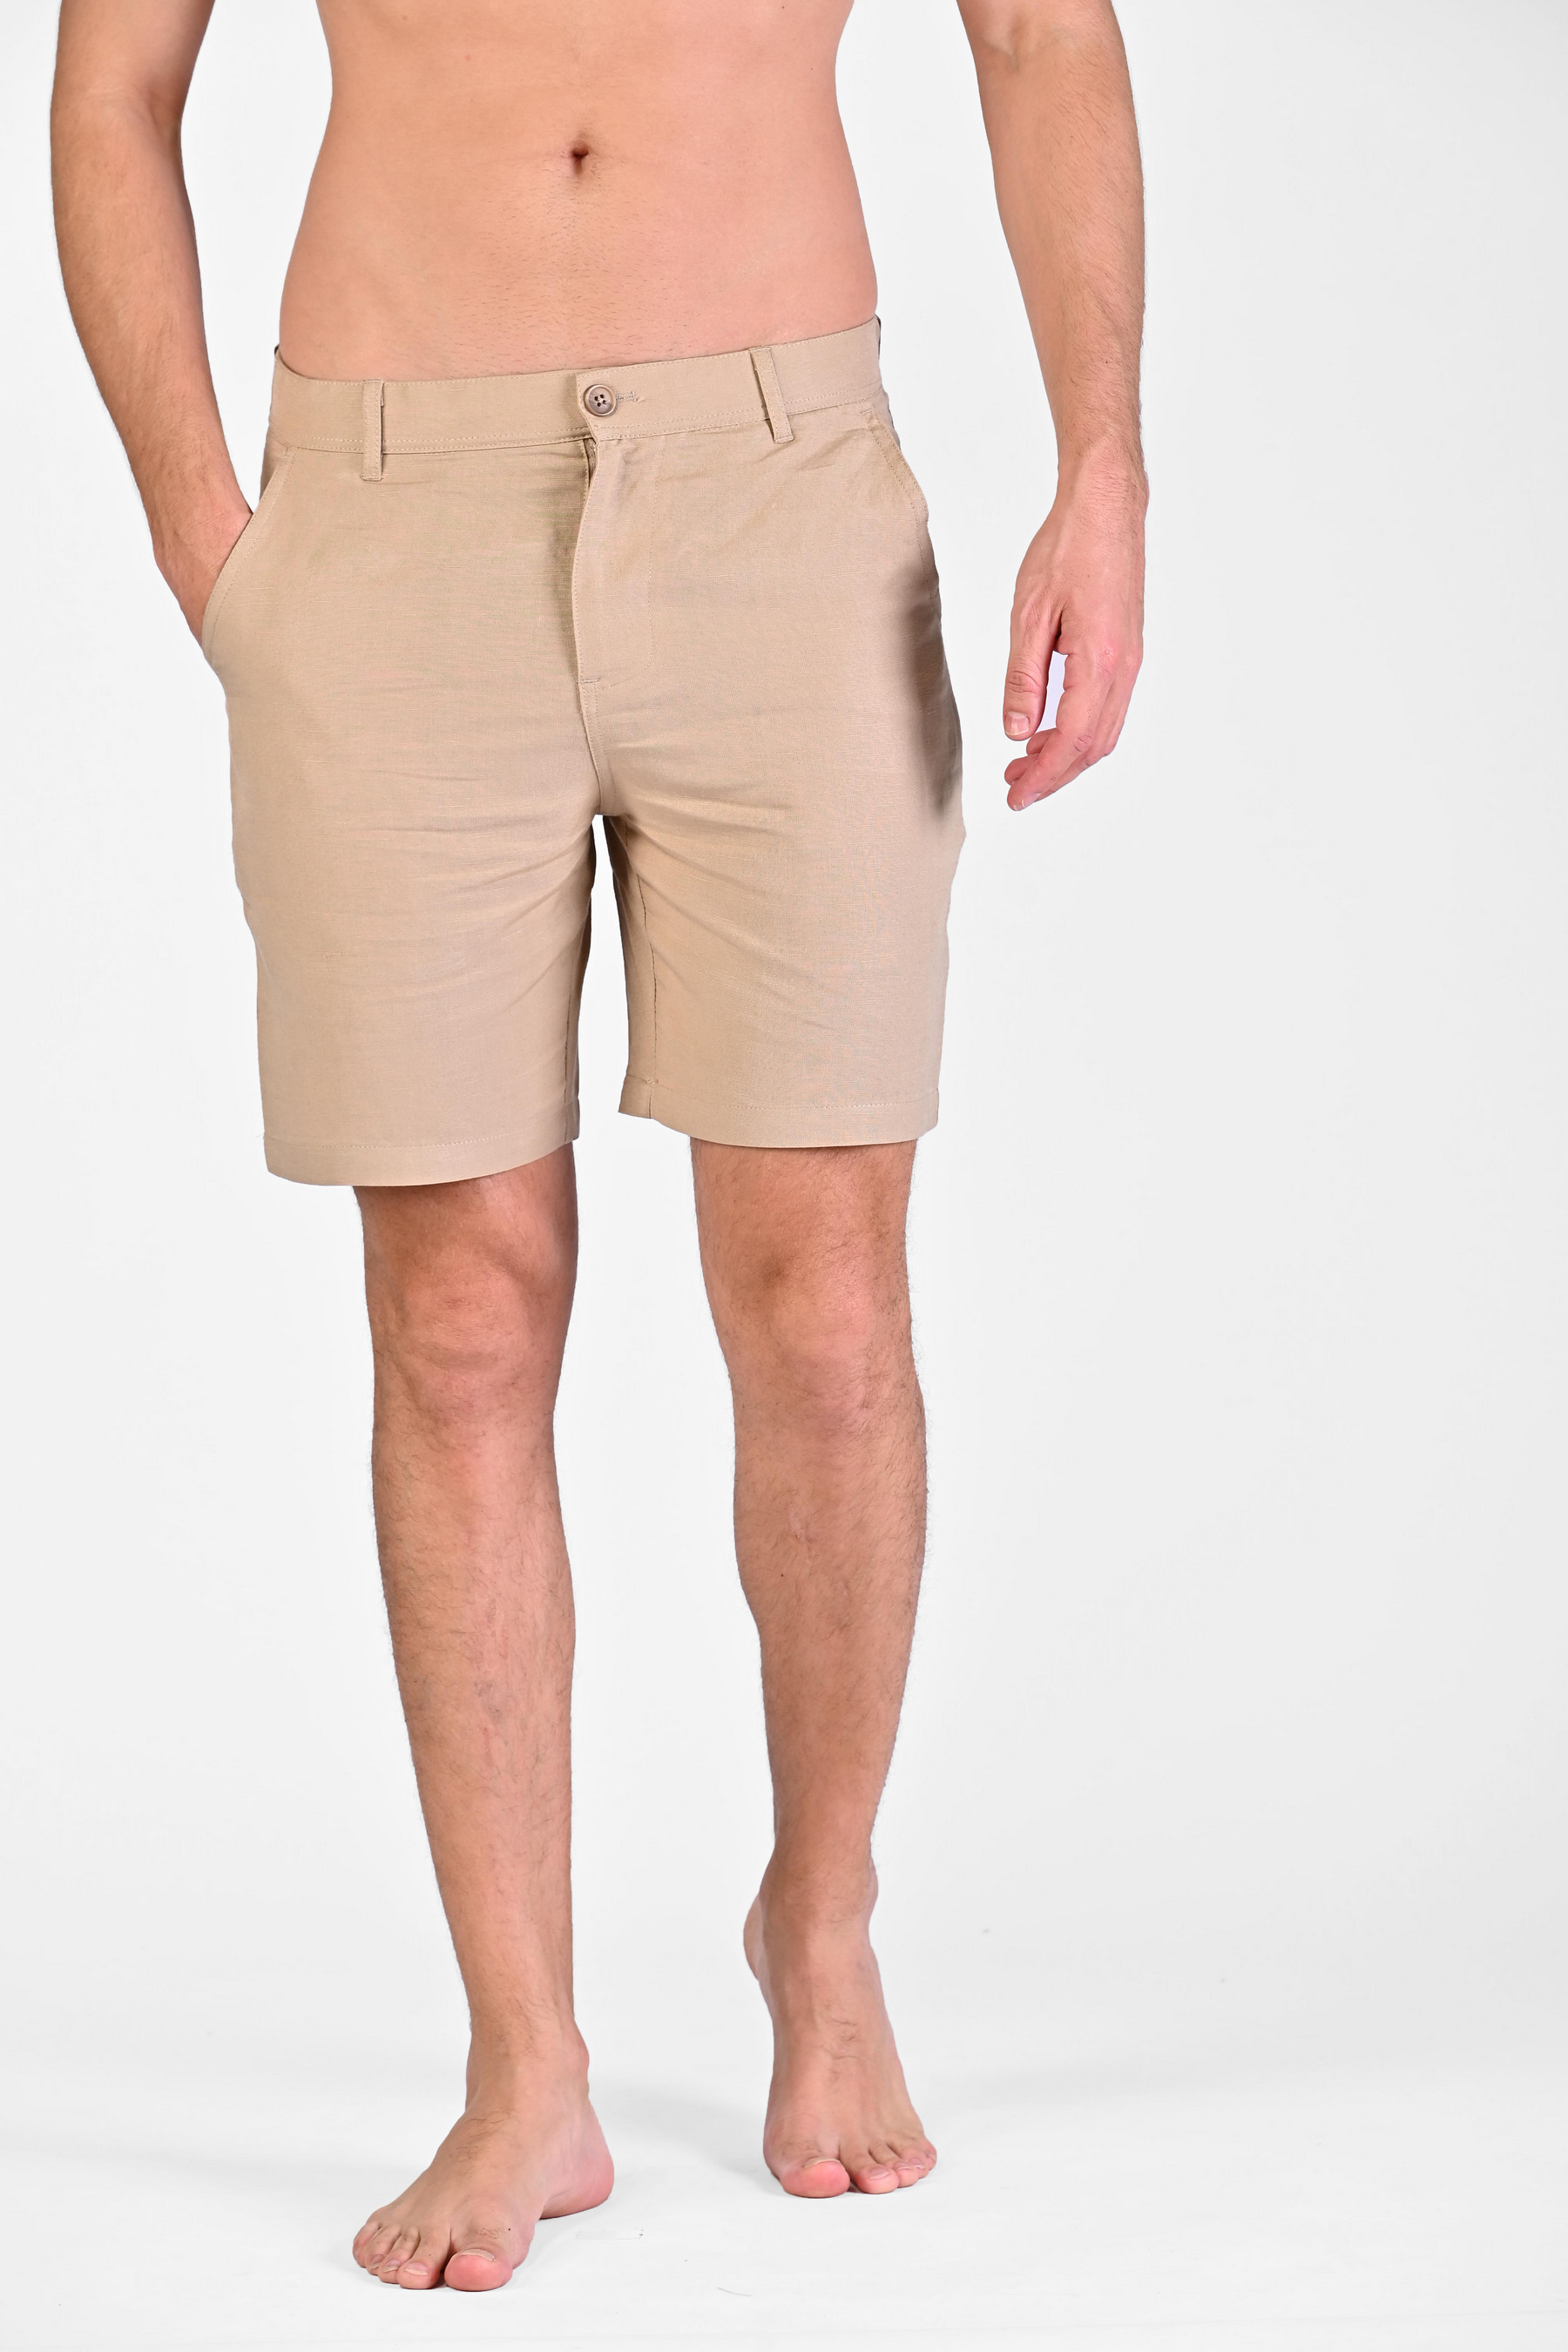 New Men's And Women's Triangle Shorts Pure Cotton Middle-Aged And